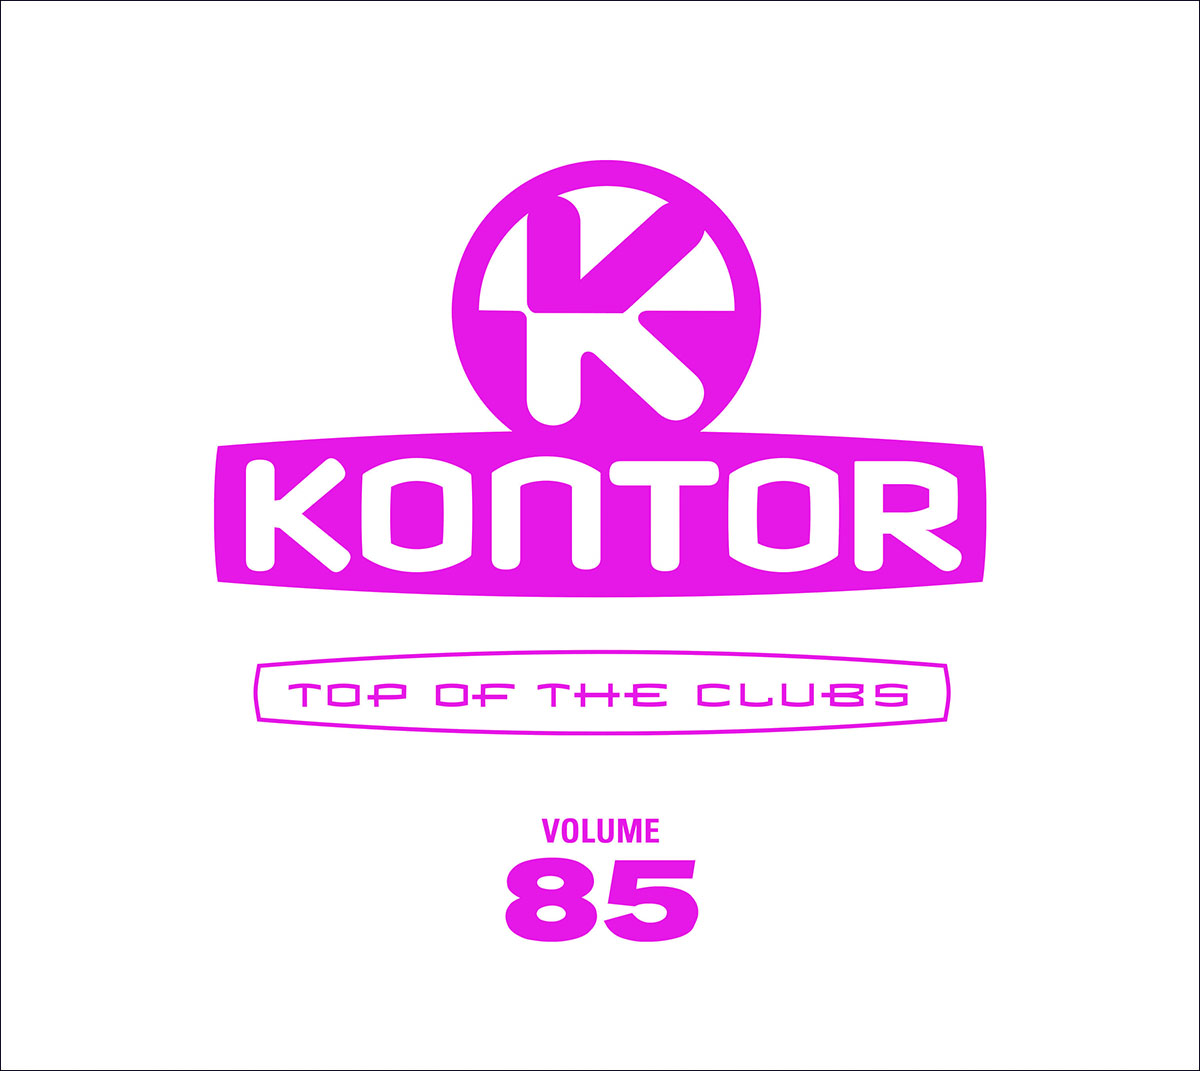 11Cover_Kontor Top Of The Clubs Vol. 85_CMYK_Print